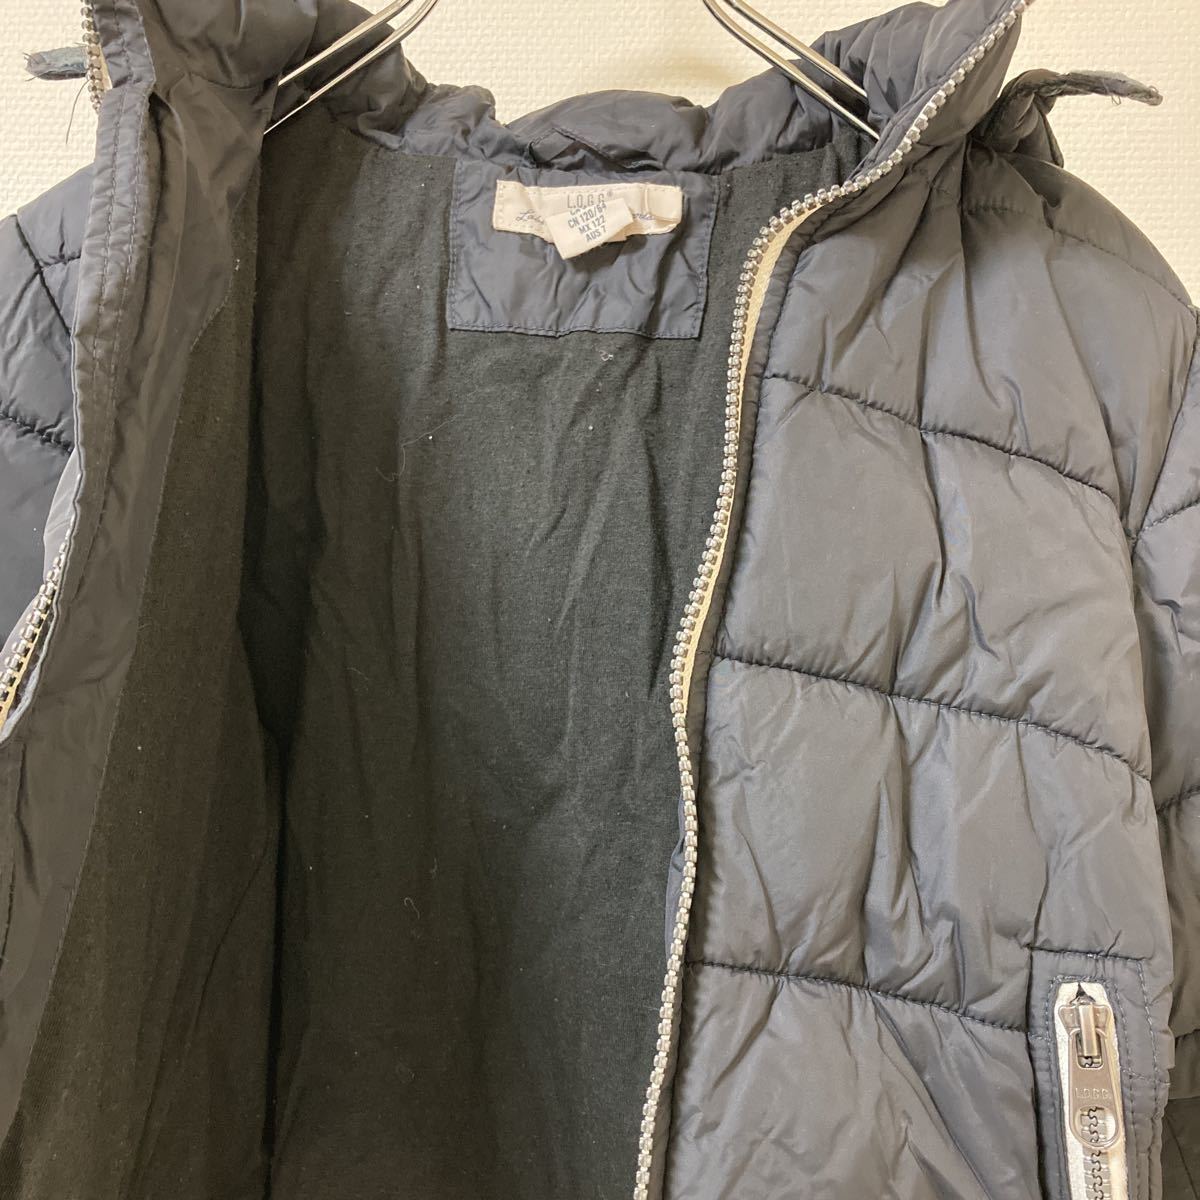  Kids man H&M down jacket outer 120 black jumper snowsuit simple hood equipped removed possible outer garment 